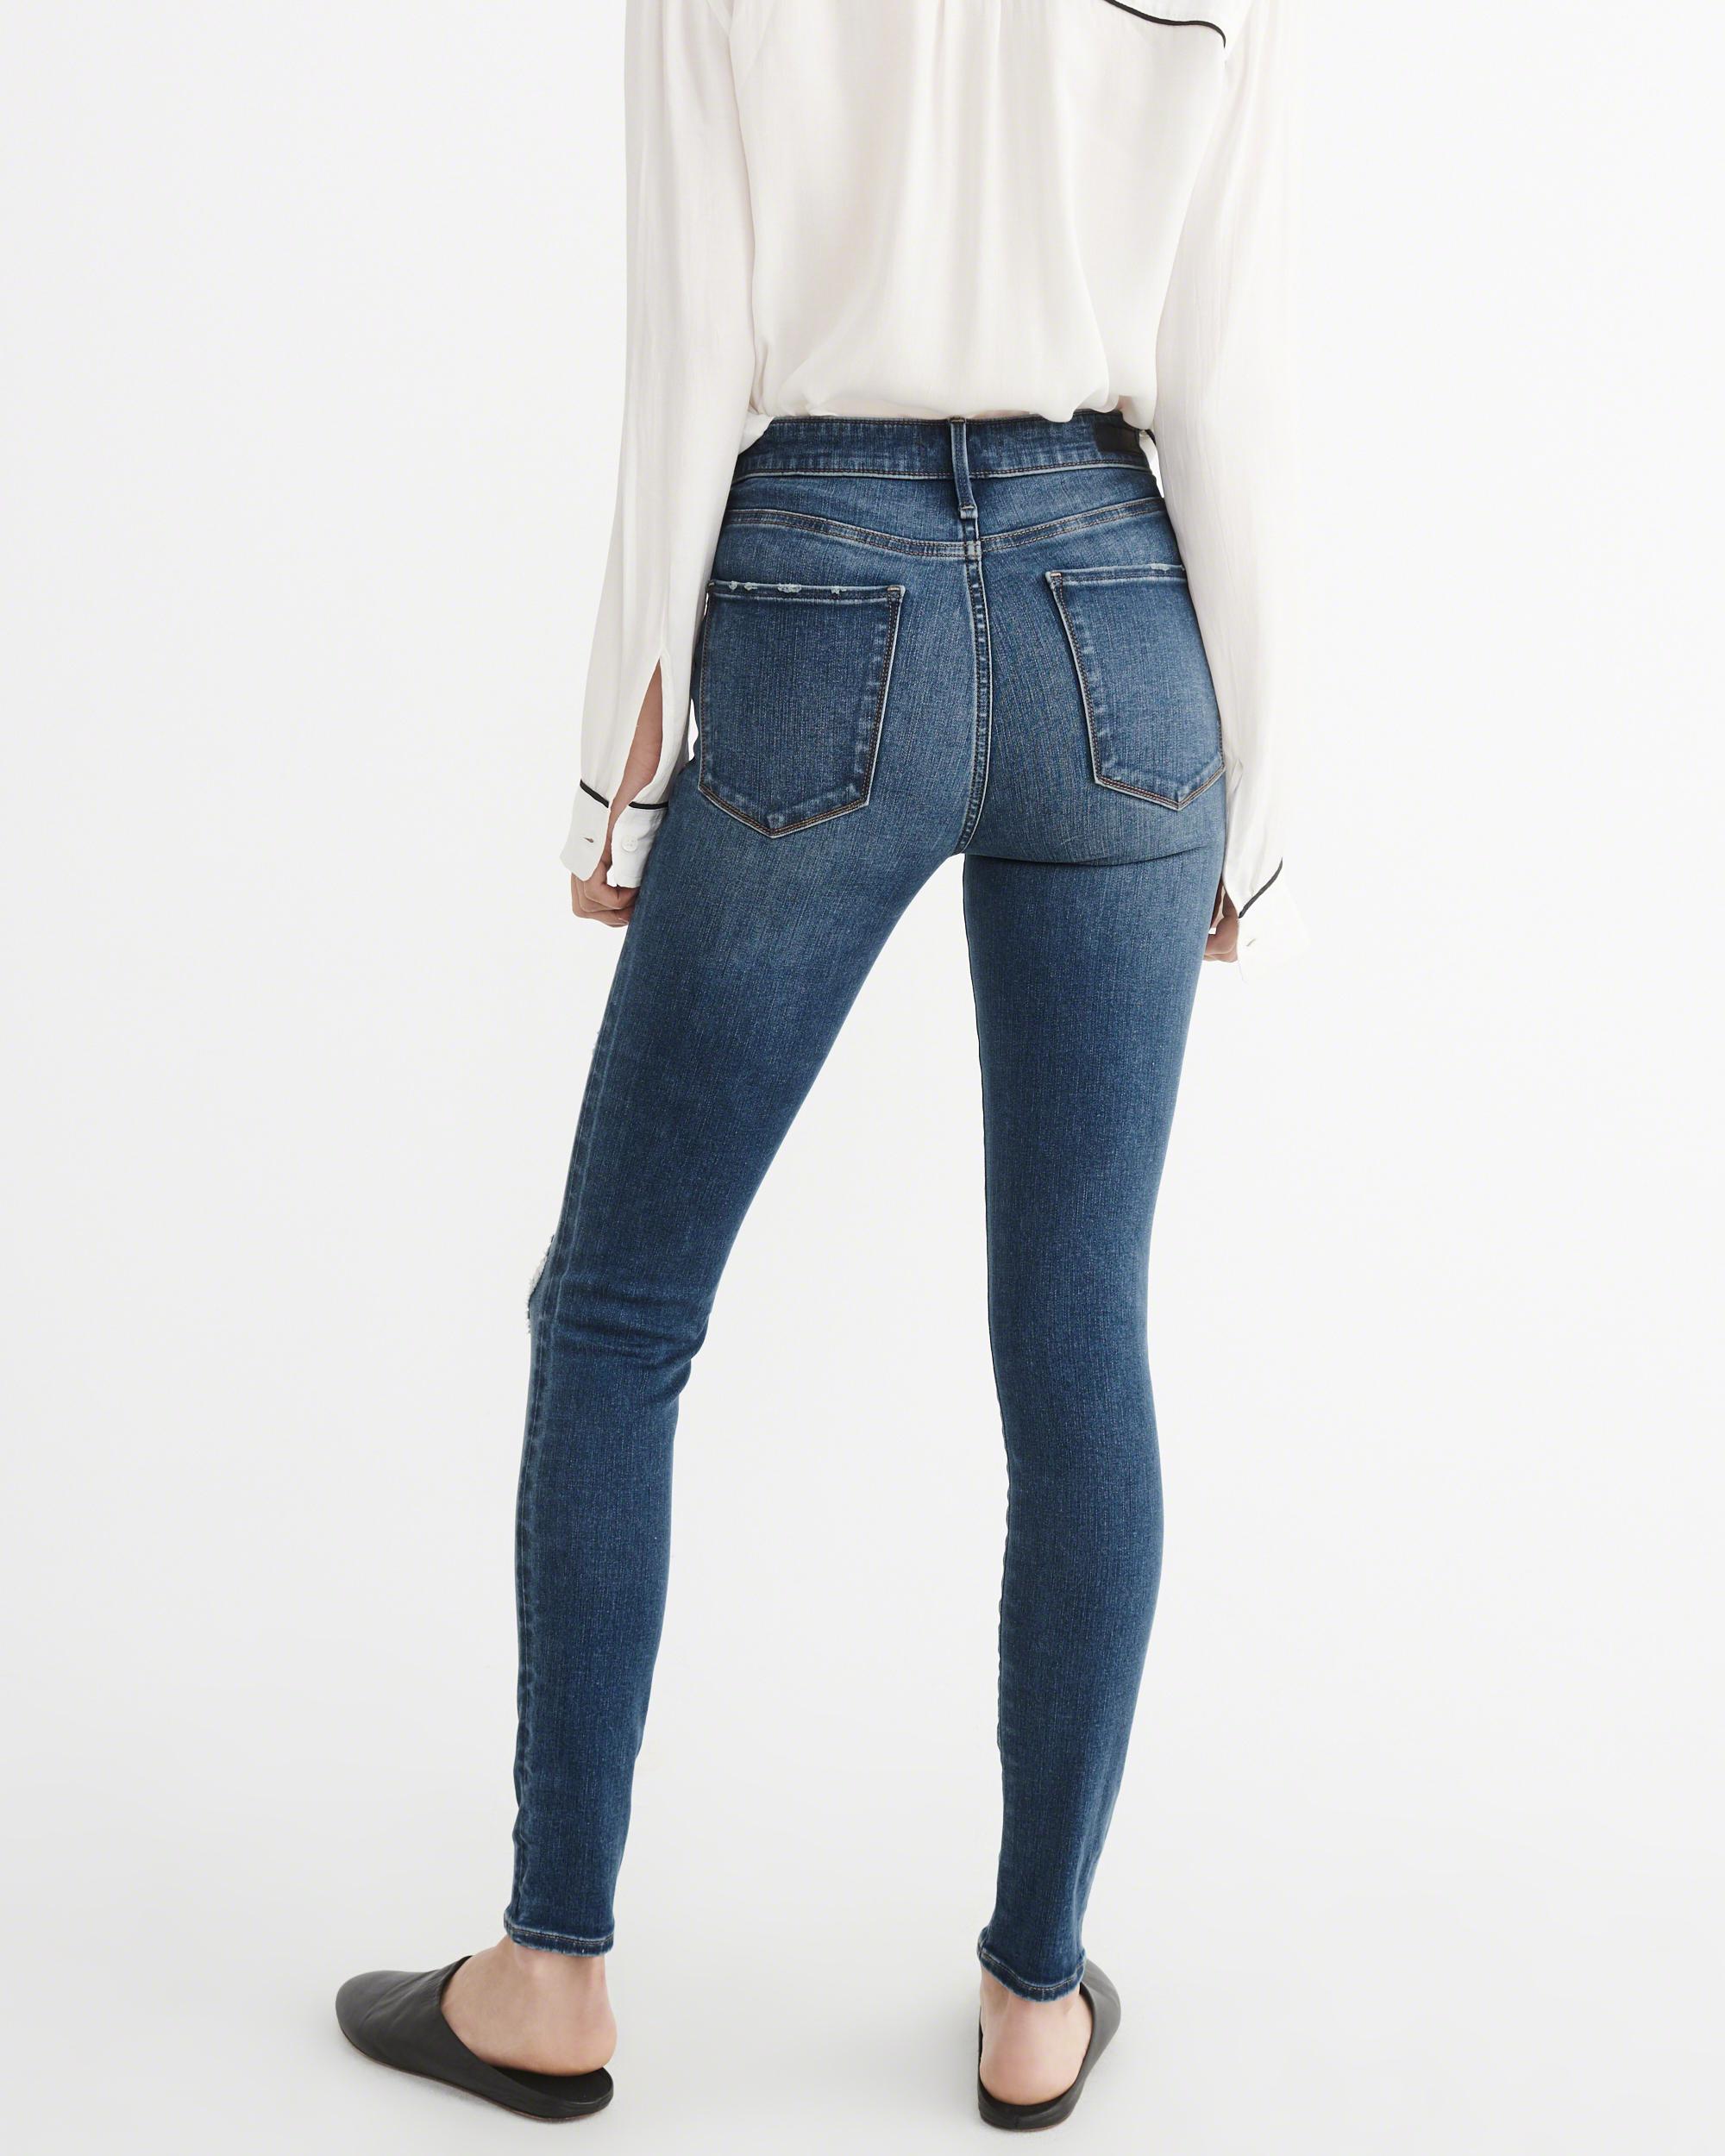 Lyst - Abercrombie & Fitch High-rise Super Skinny Jeans Exchange Color ...